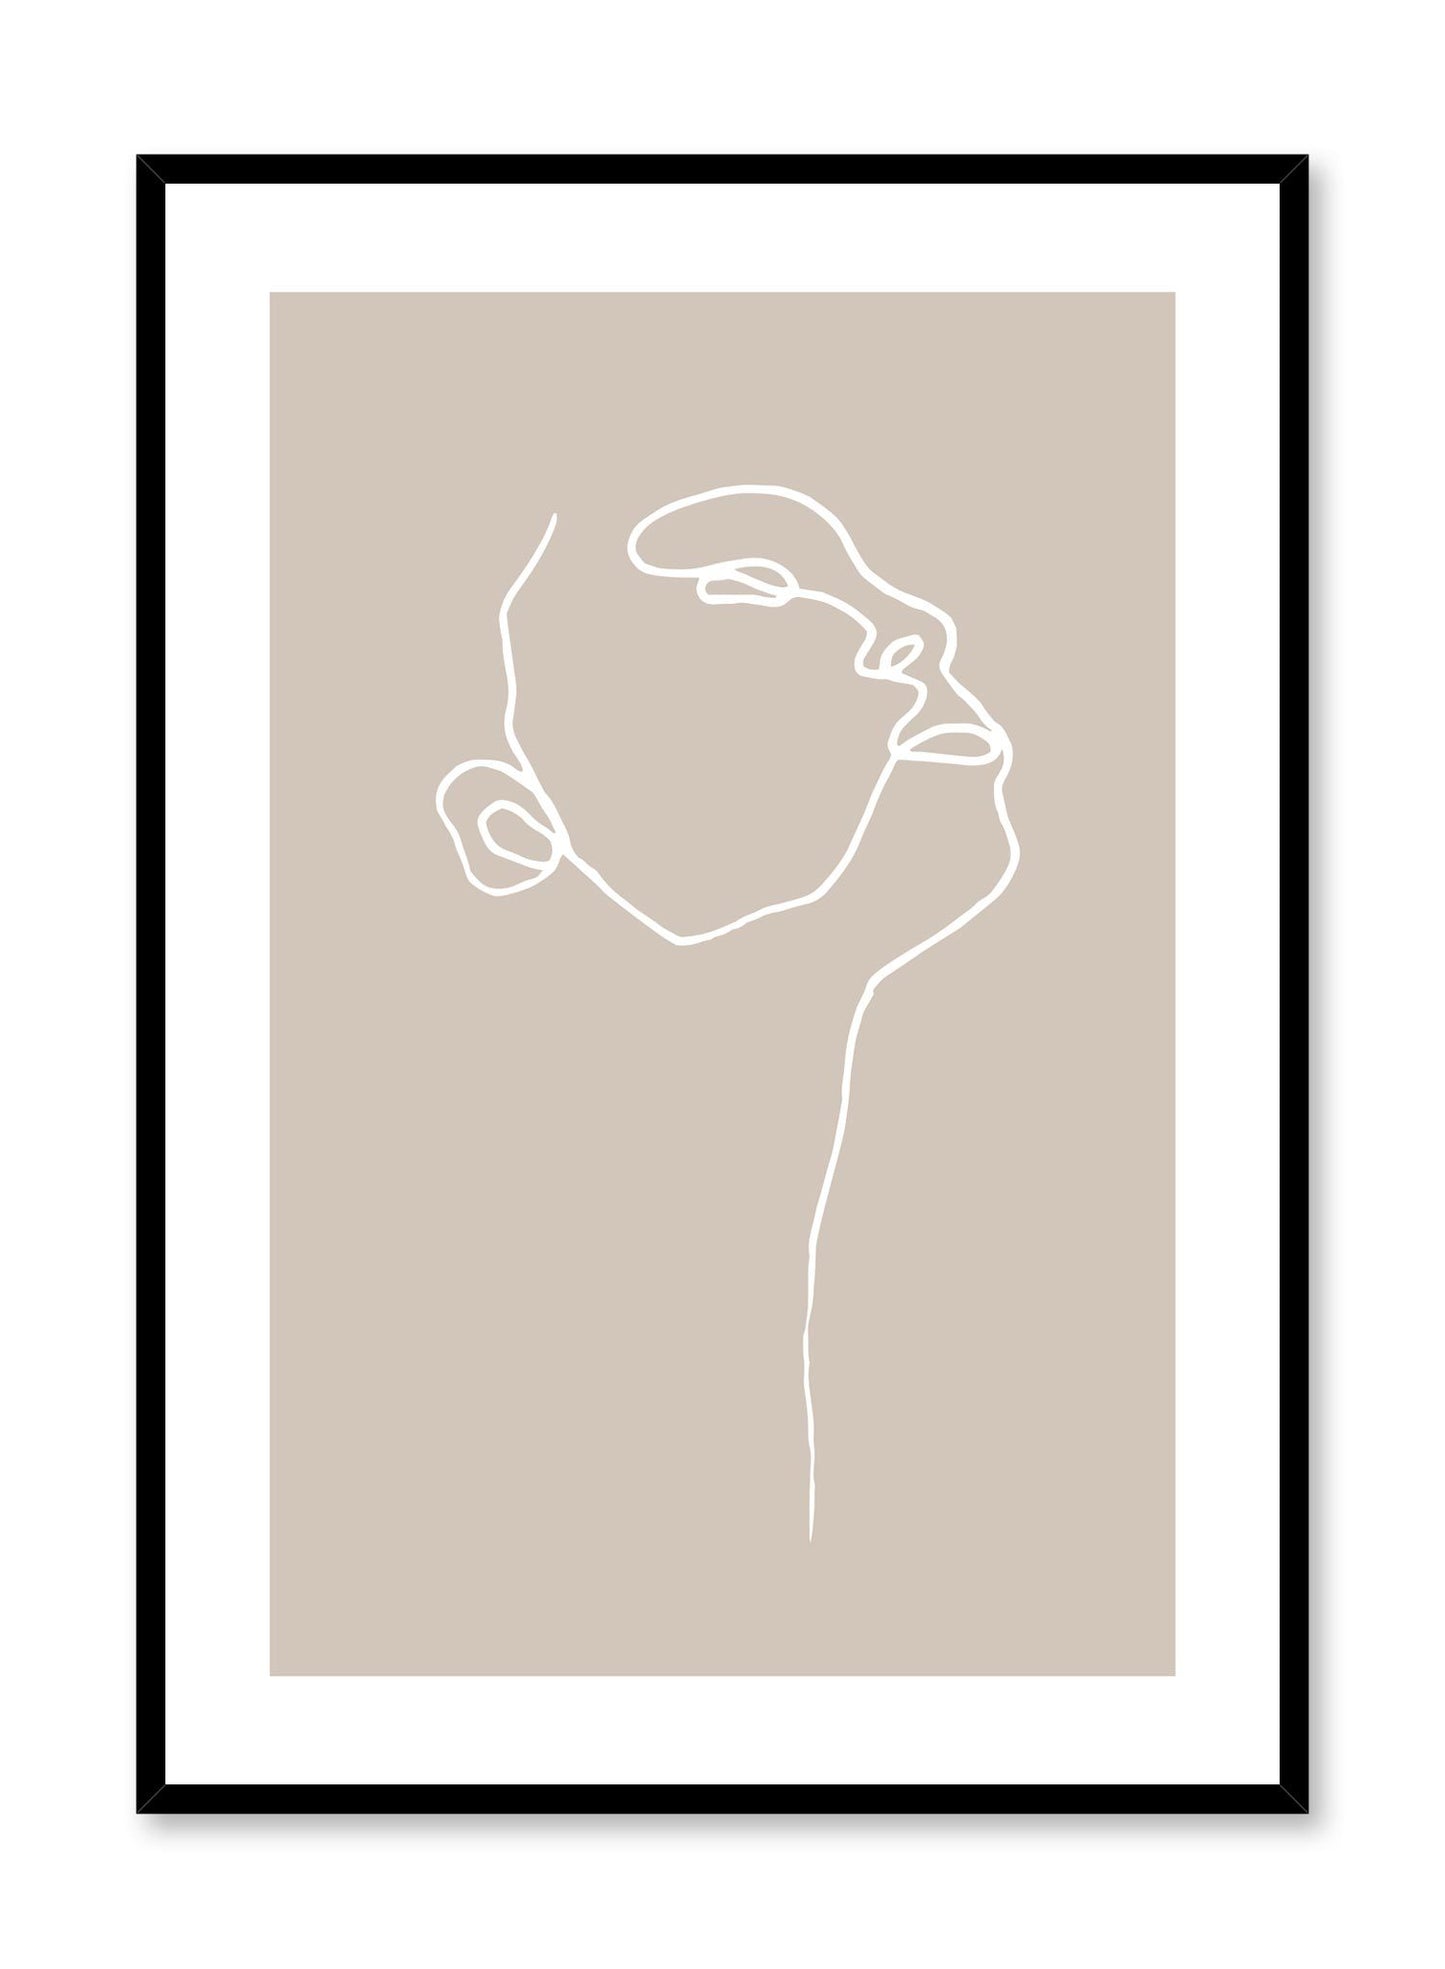 Modern minimalist poster by Opposite Wall with abstract illustration of Profile on orange tan background